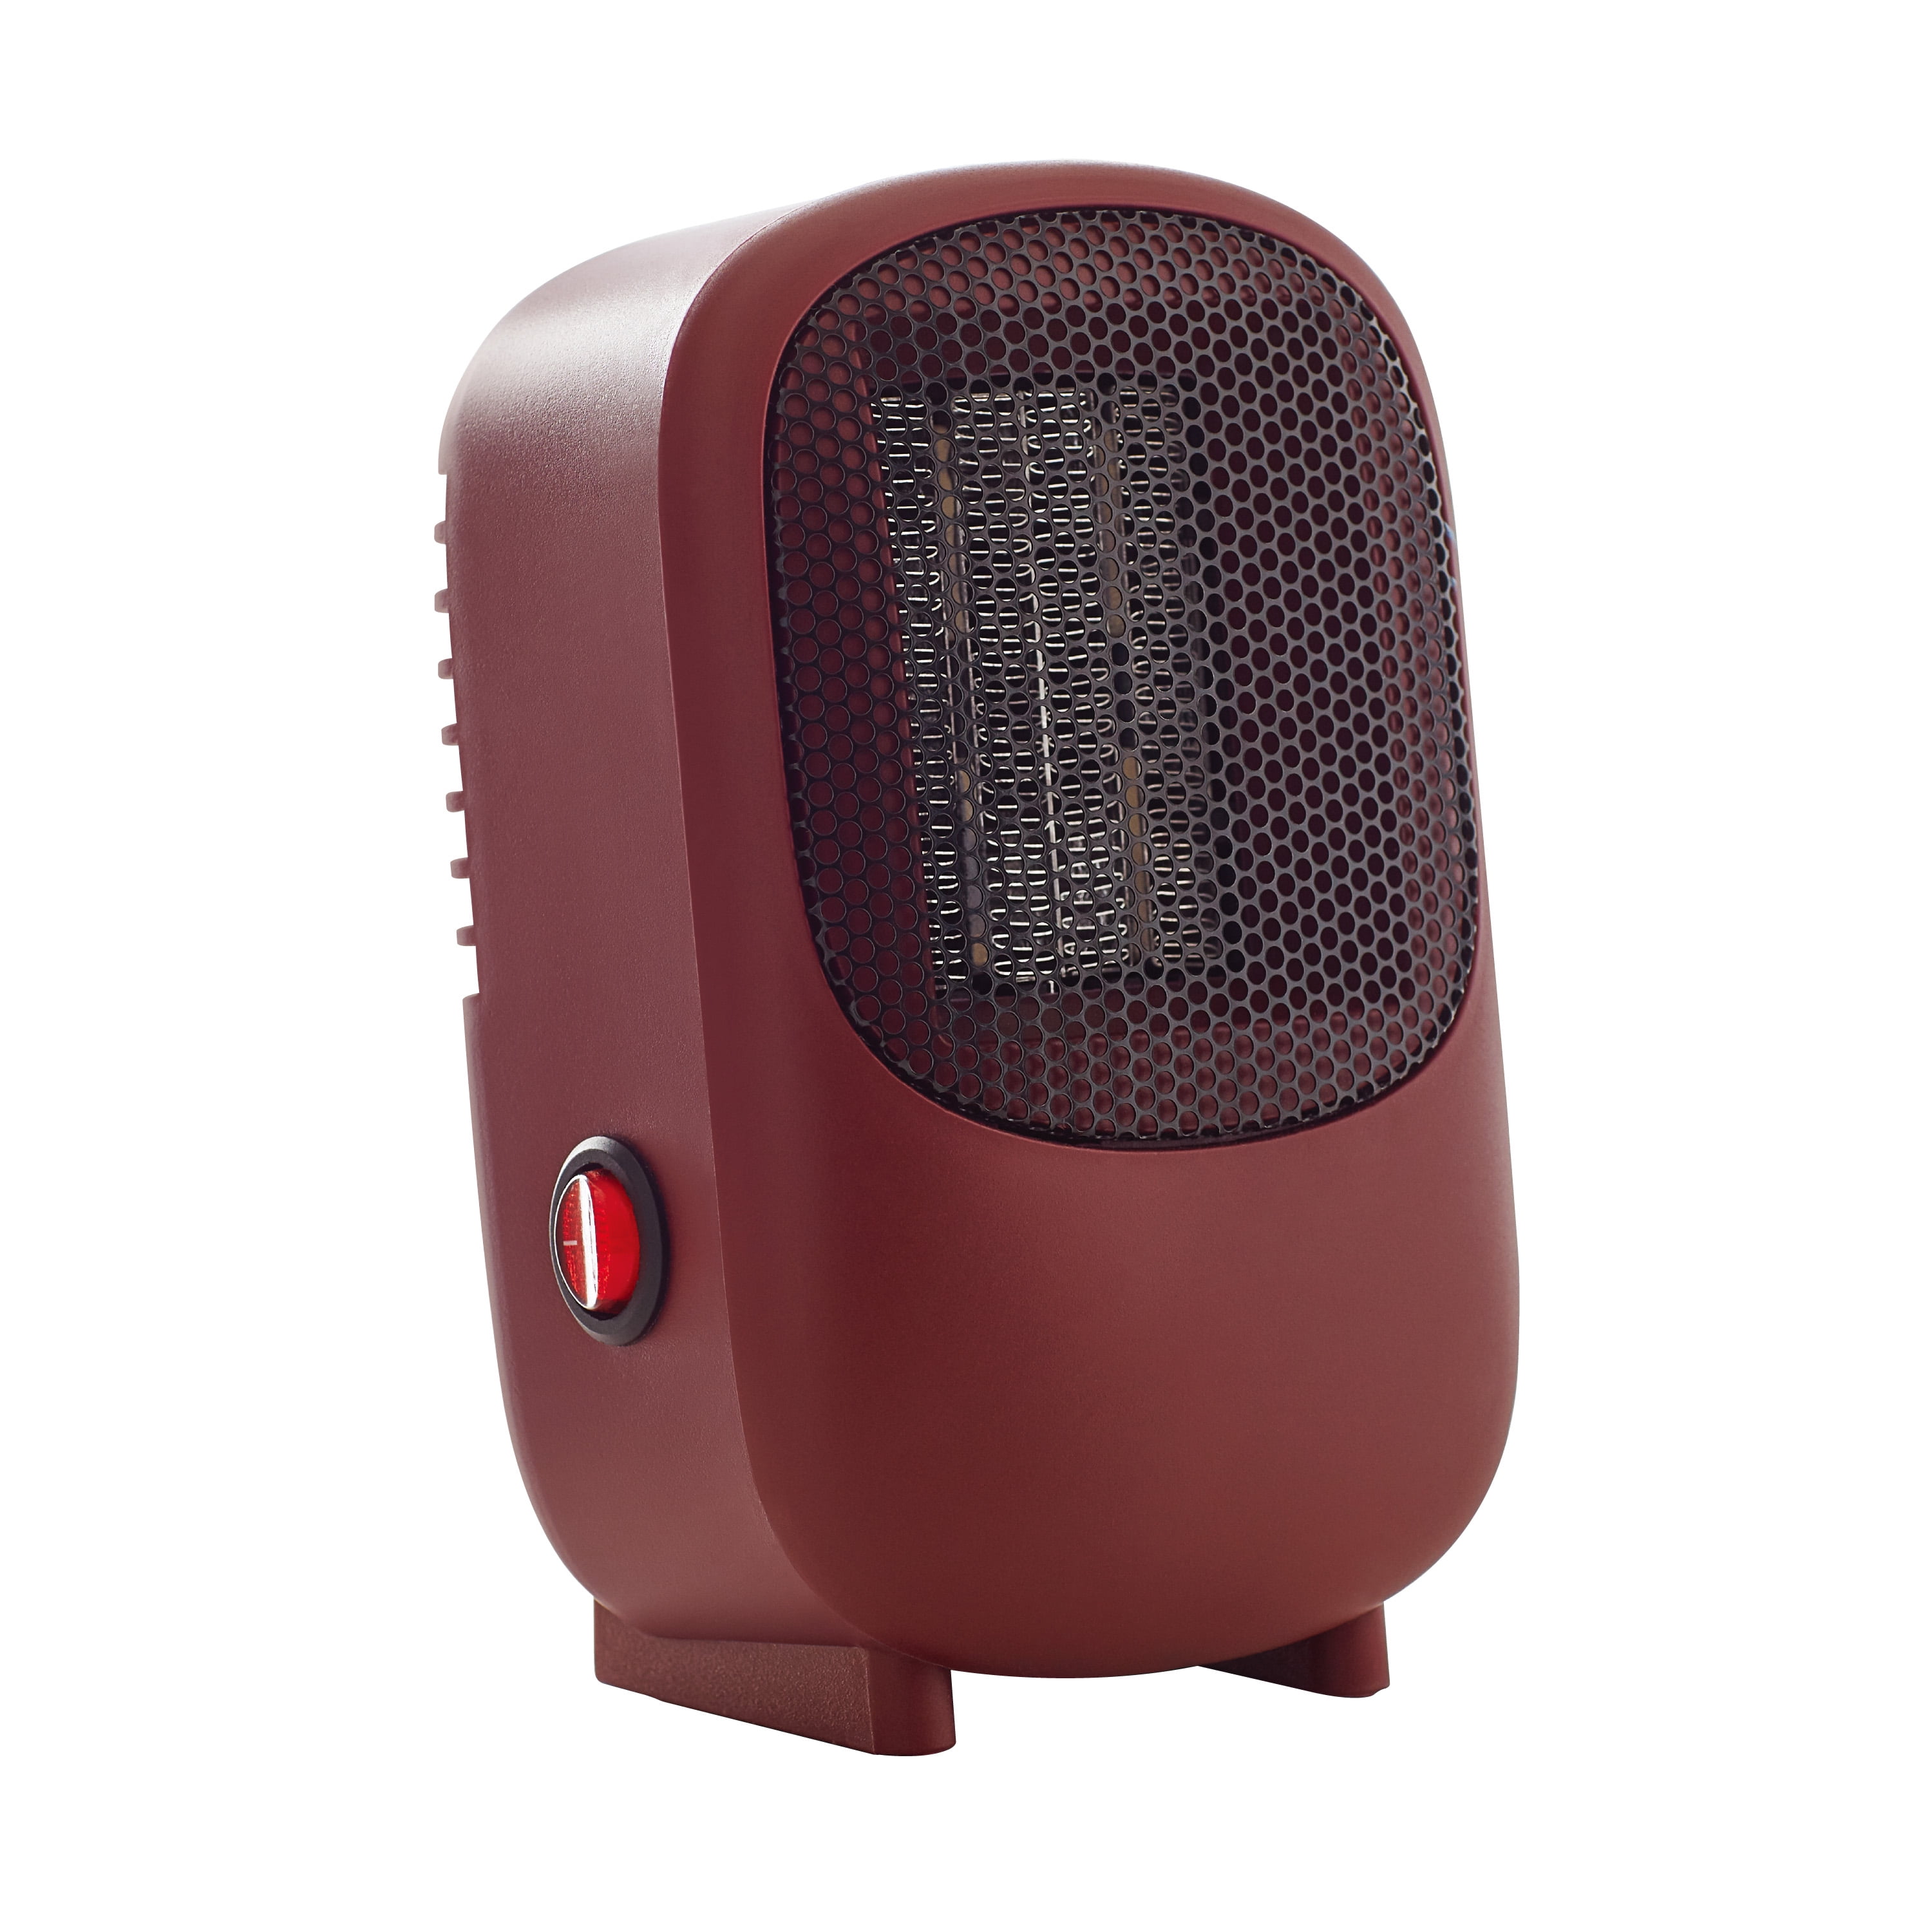 Mainstays Personal Mini Electric Ceramic Heater 350W Indoor Red Burgundy